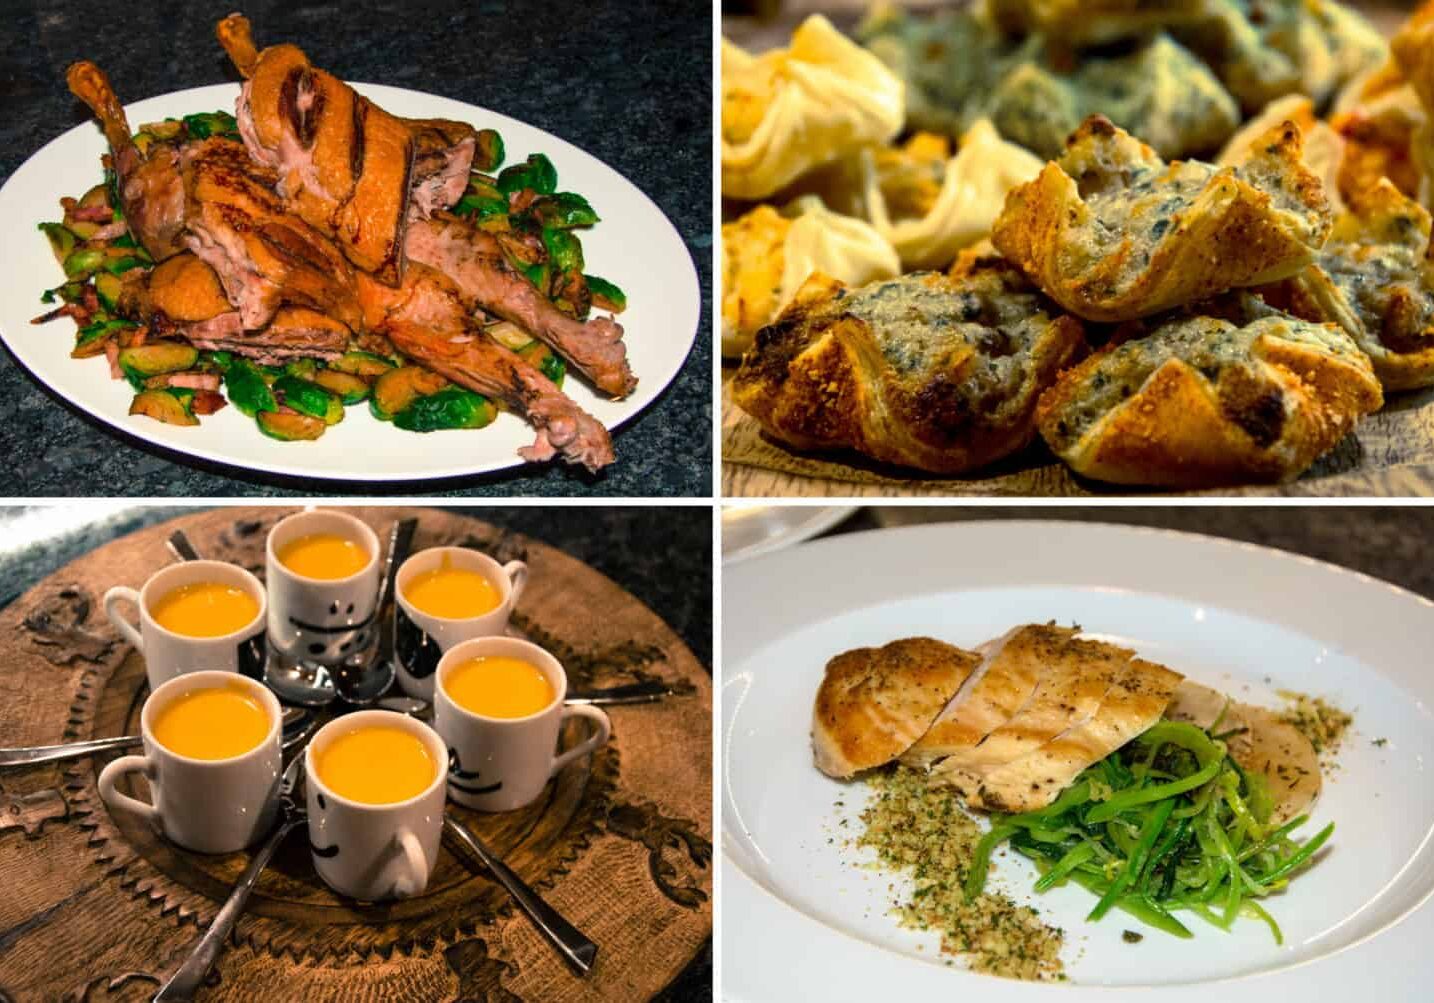 Pictures of roast duck, roast chicken, soup in espresso cups and pastry canapes